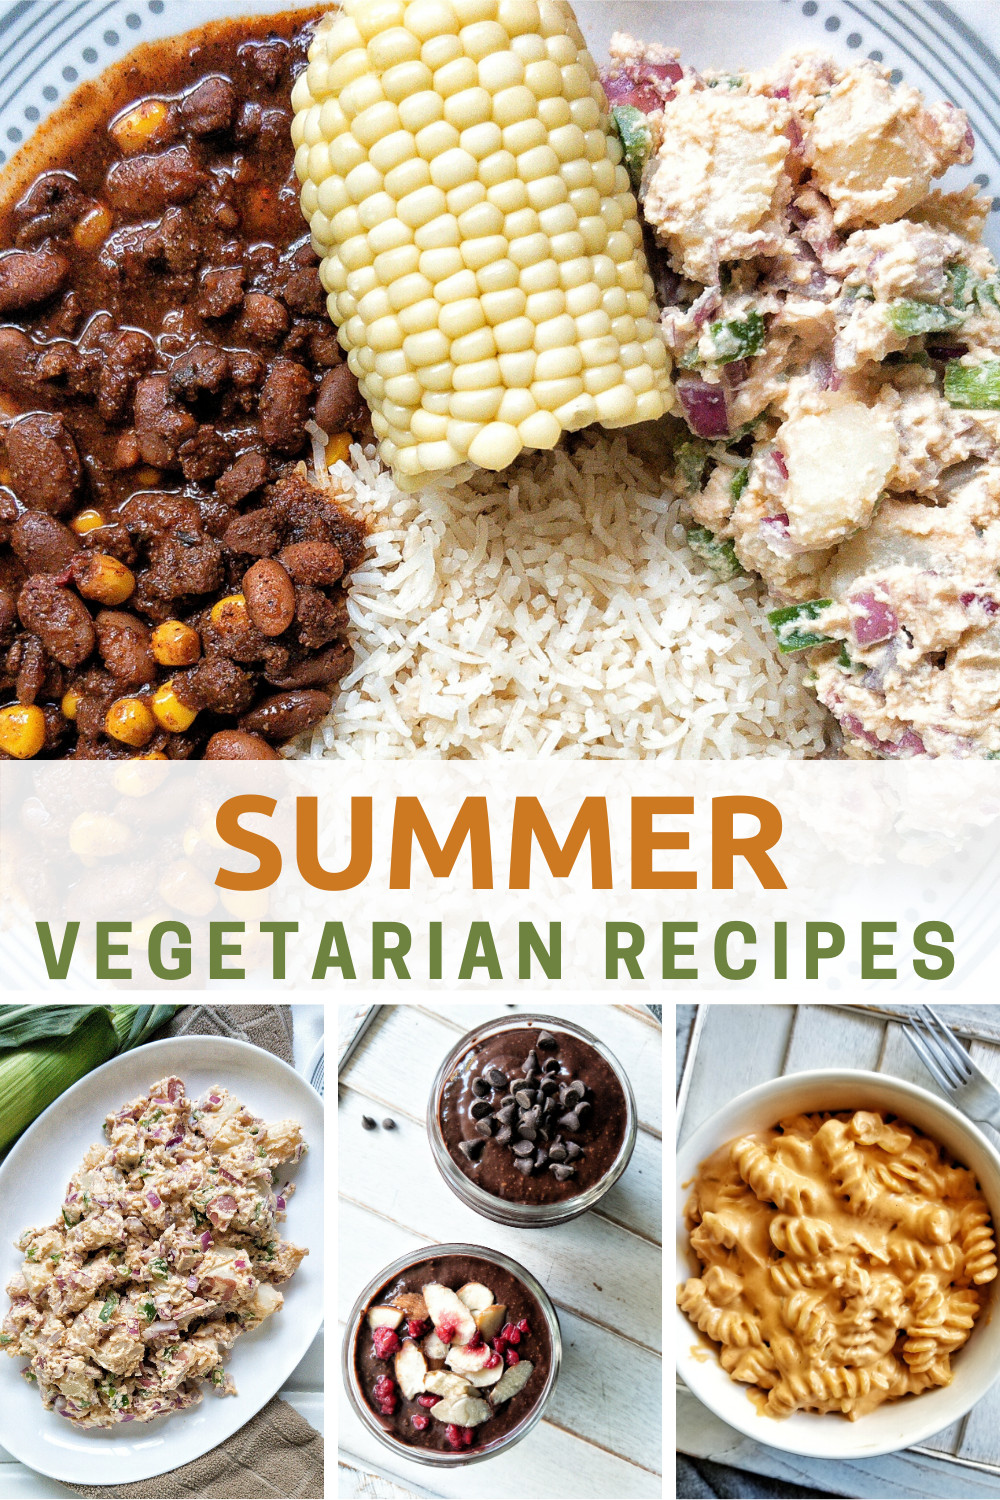 Plant Based Recipes For Beginners Dessert
 11 Ve arian Summer Recipes in 2020